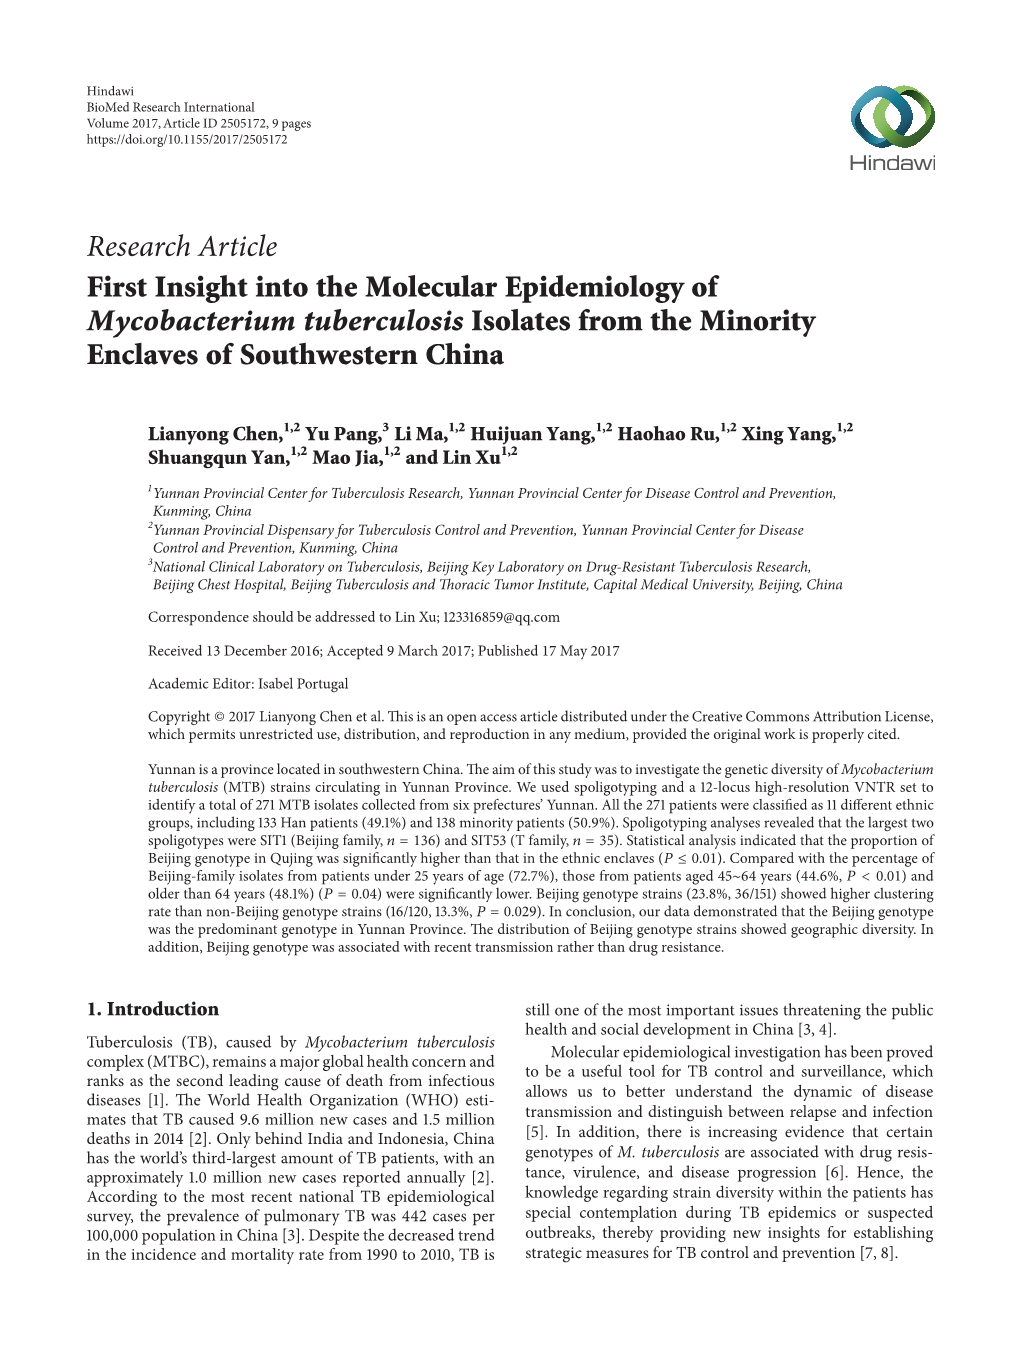 Research Article First Insight Into the Molecular Epidemiology of Mycobacterium Tuberculosis Isolates from the Minority Enclaves of Southwestern China